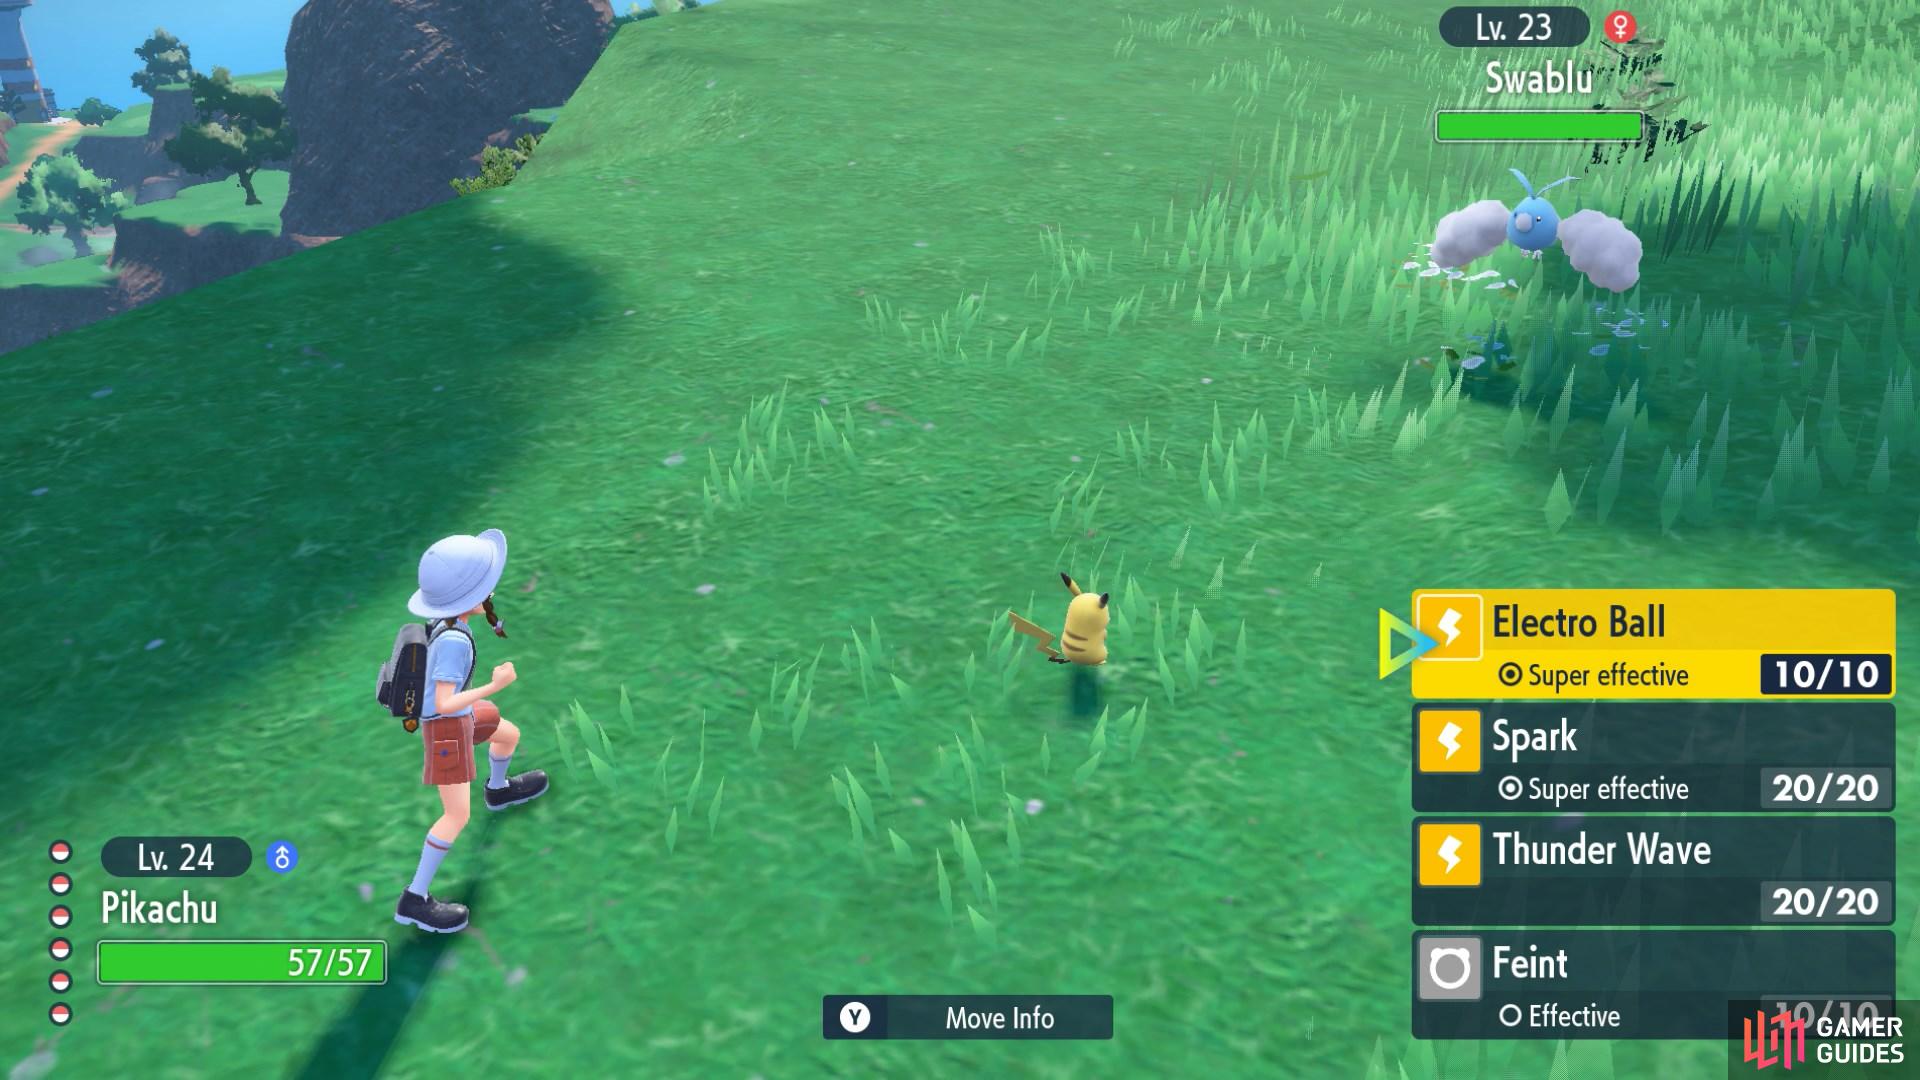 Prepare for lots more epic, turn-based battles! (Credit: The Pokémon Company).